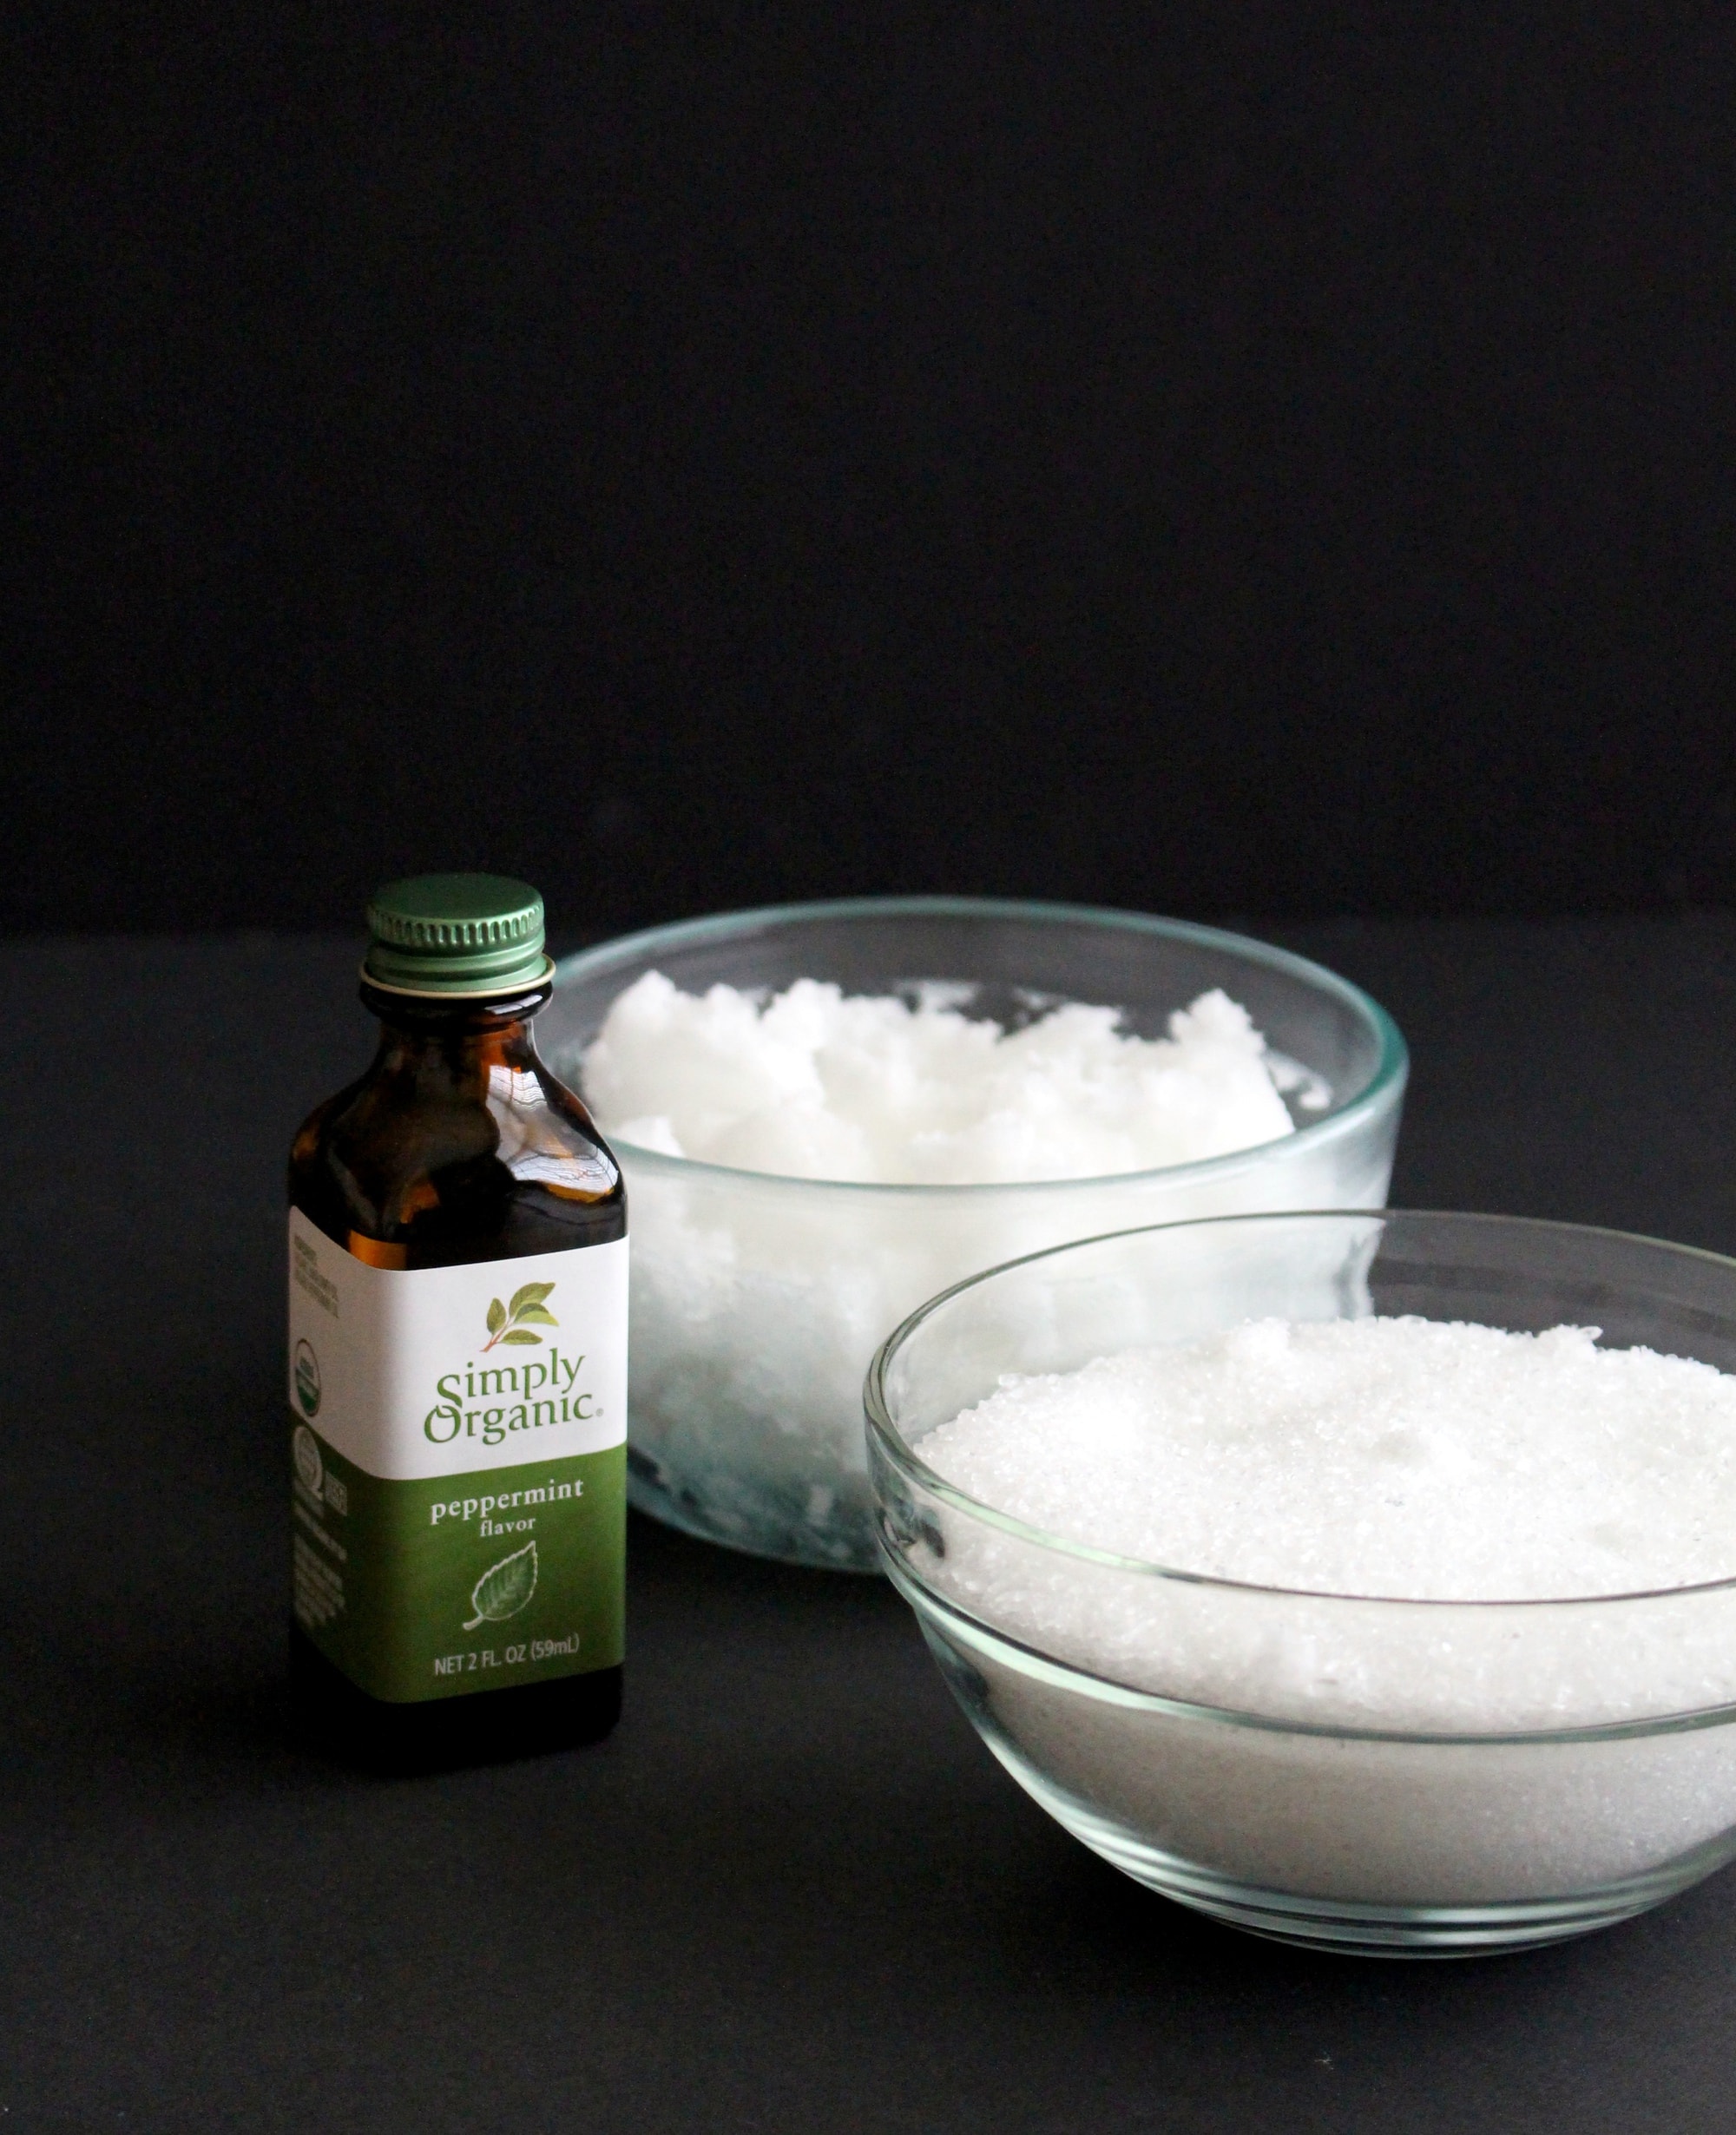 [Food for Beauty] Peppermint + Coconut Oil Foot Scrub